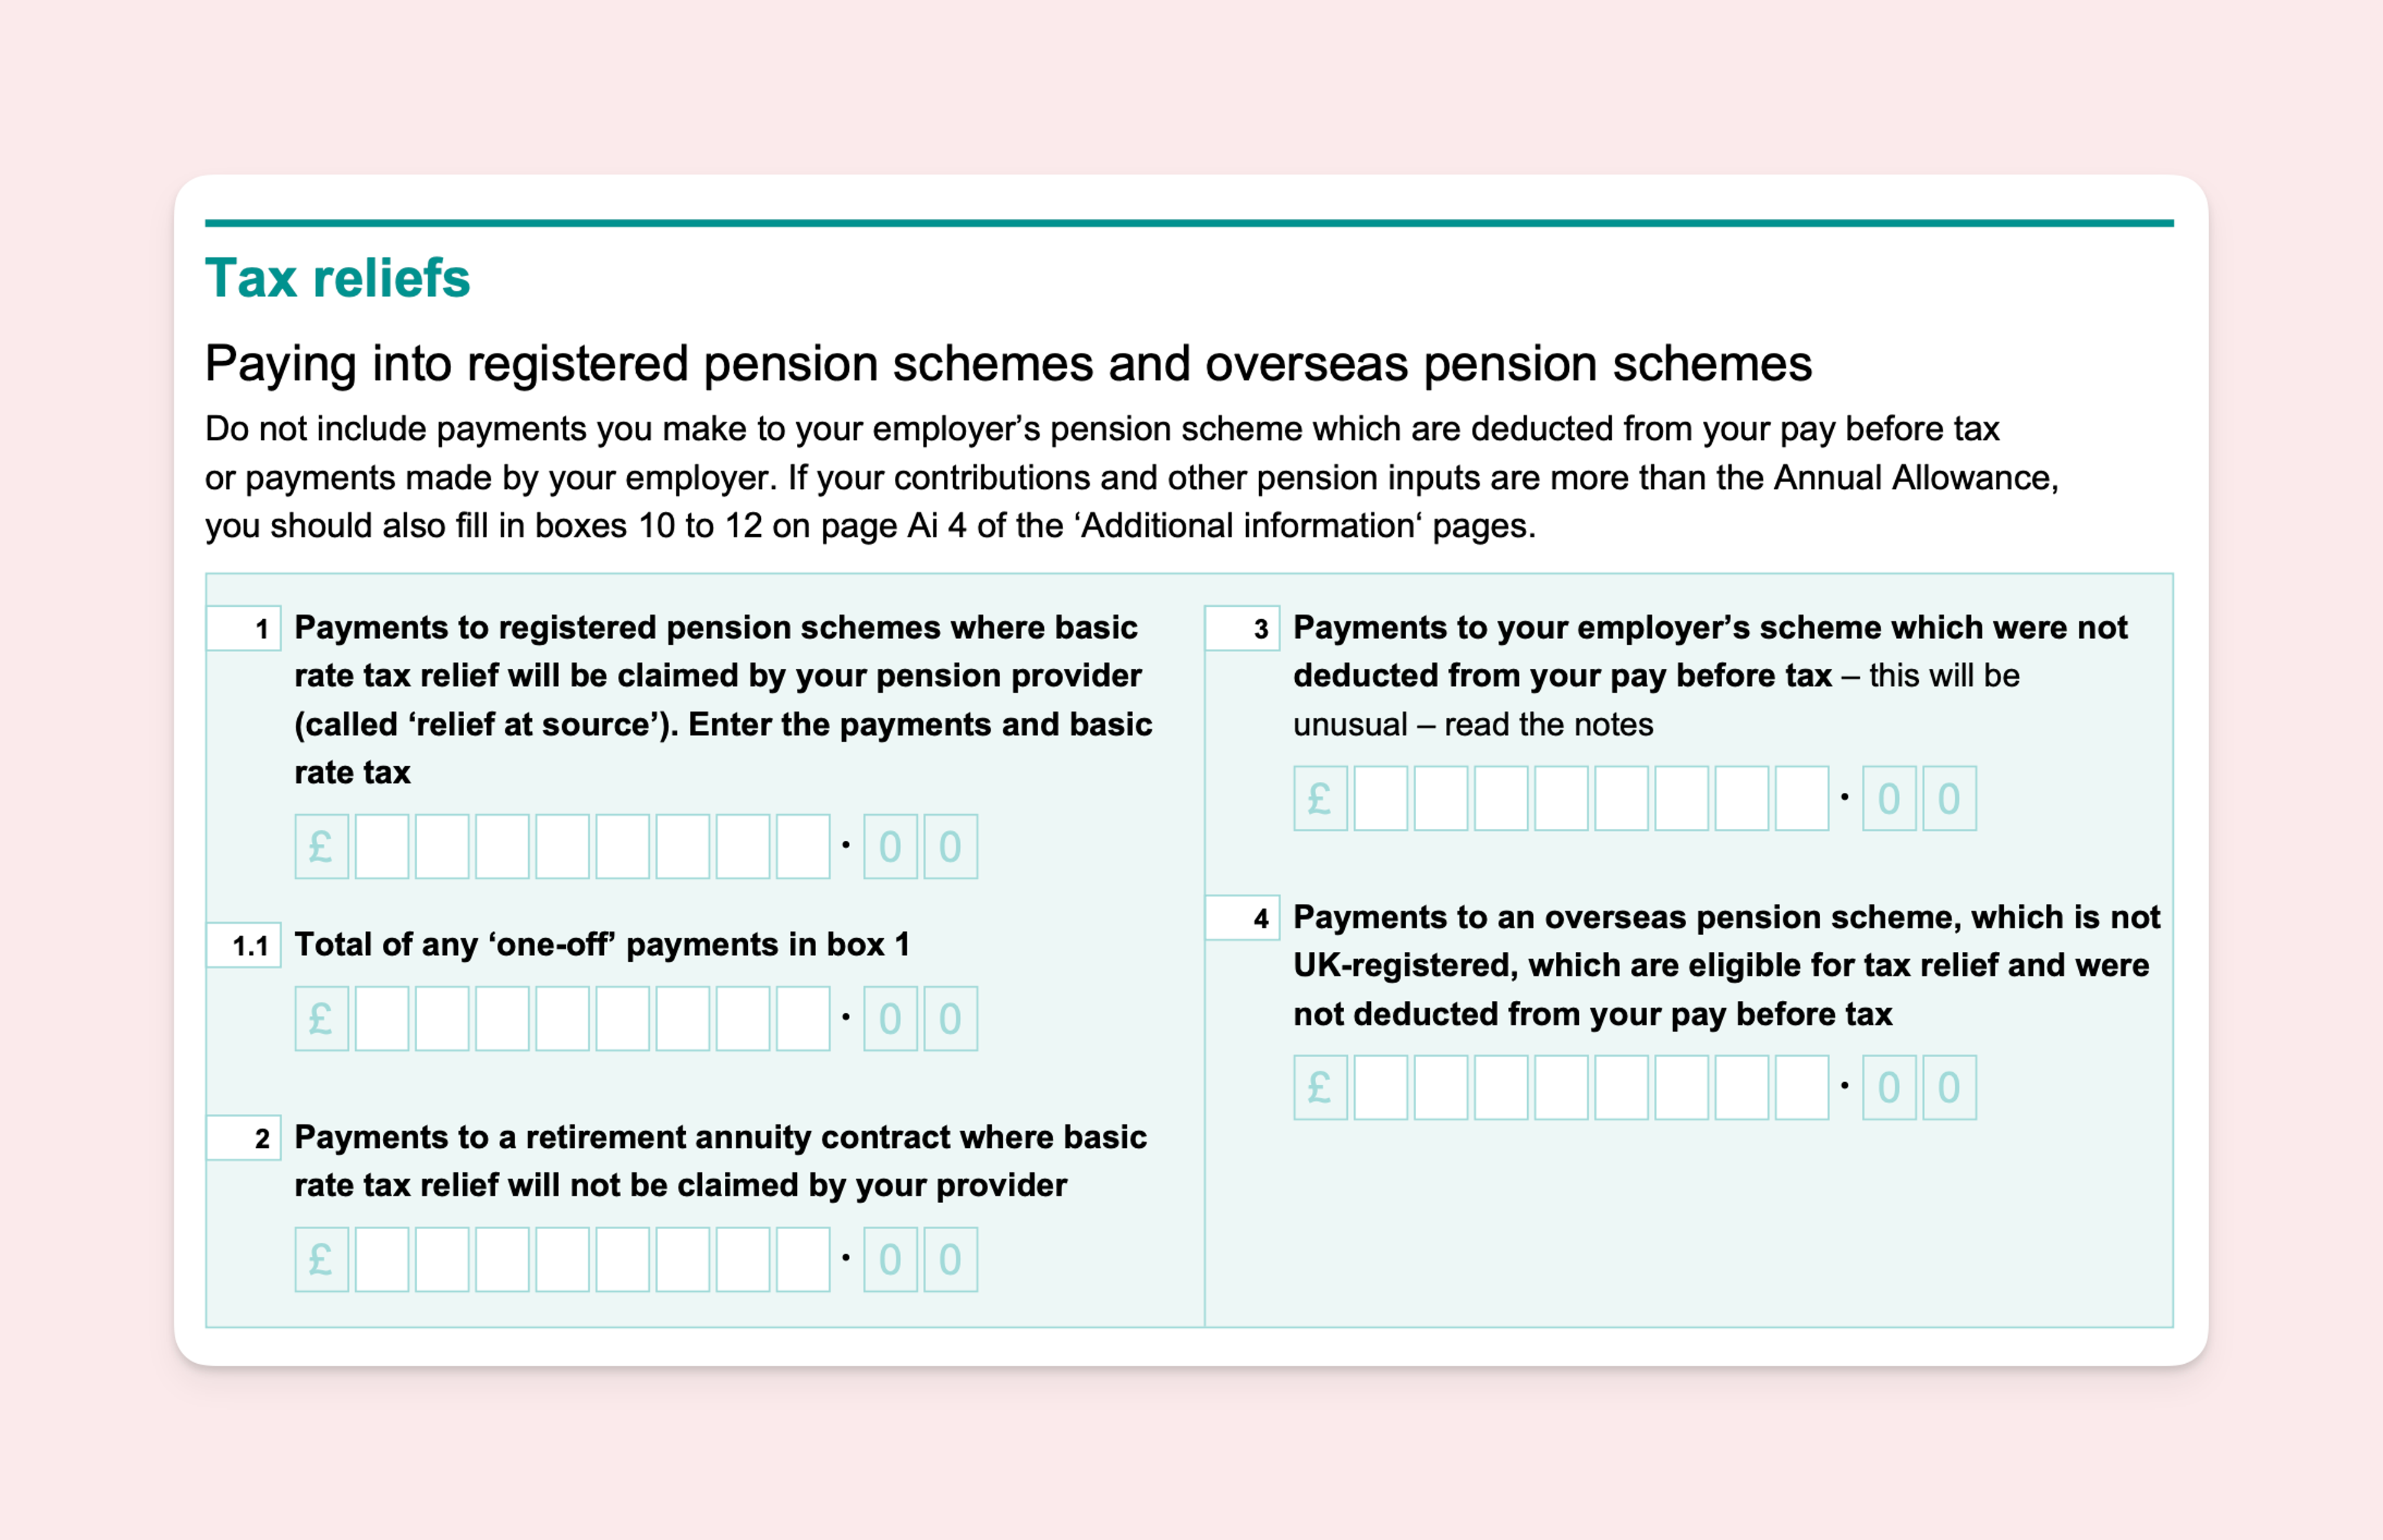 Document titled 'Tax reliefs' detailing instructions on how to report payments into pension schemes for tax purposes. It includes four sections: 1) Payments to registered pension schemes with basic rate tax relief, 1.1) Total of 'one-off' payments in box 1, 2) Payments to a retirement annuity contract, 3) Payments to your employer's scheme not deducted from pay before tax, and 4) Payments to an overseas pension scheme. Each section has an input field for the amount in pounds.